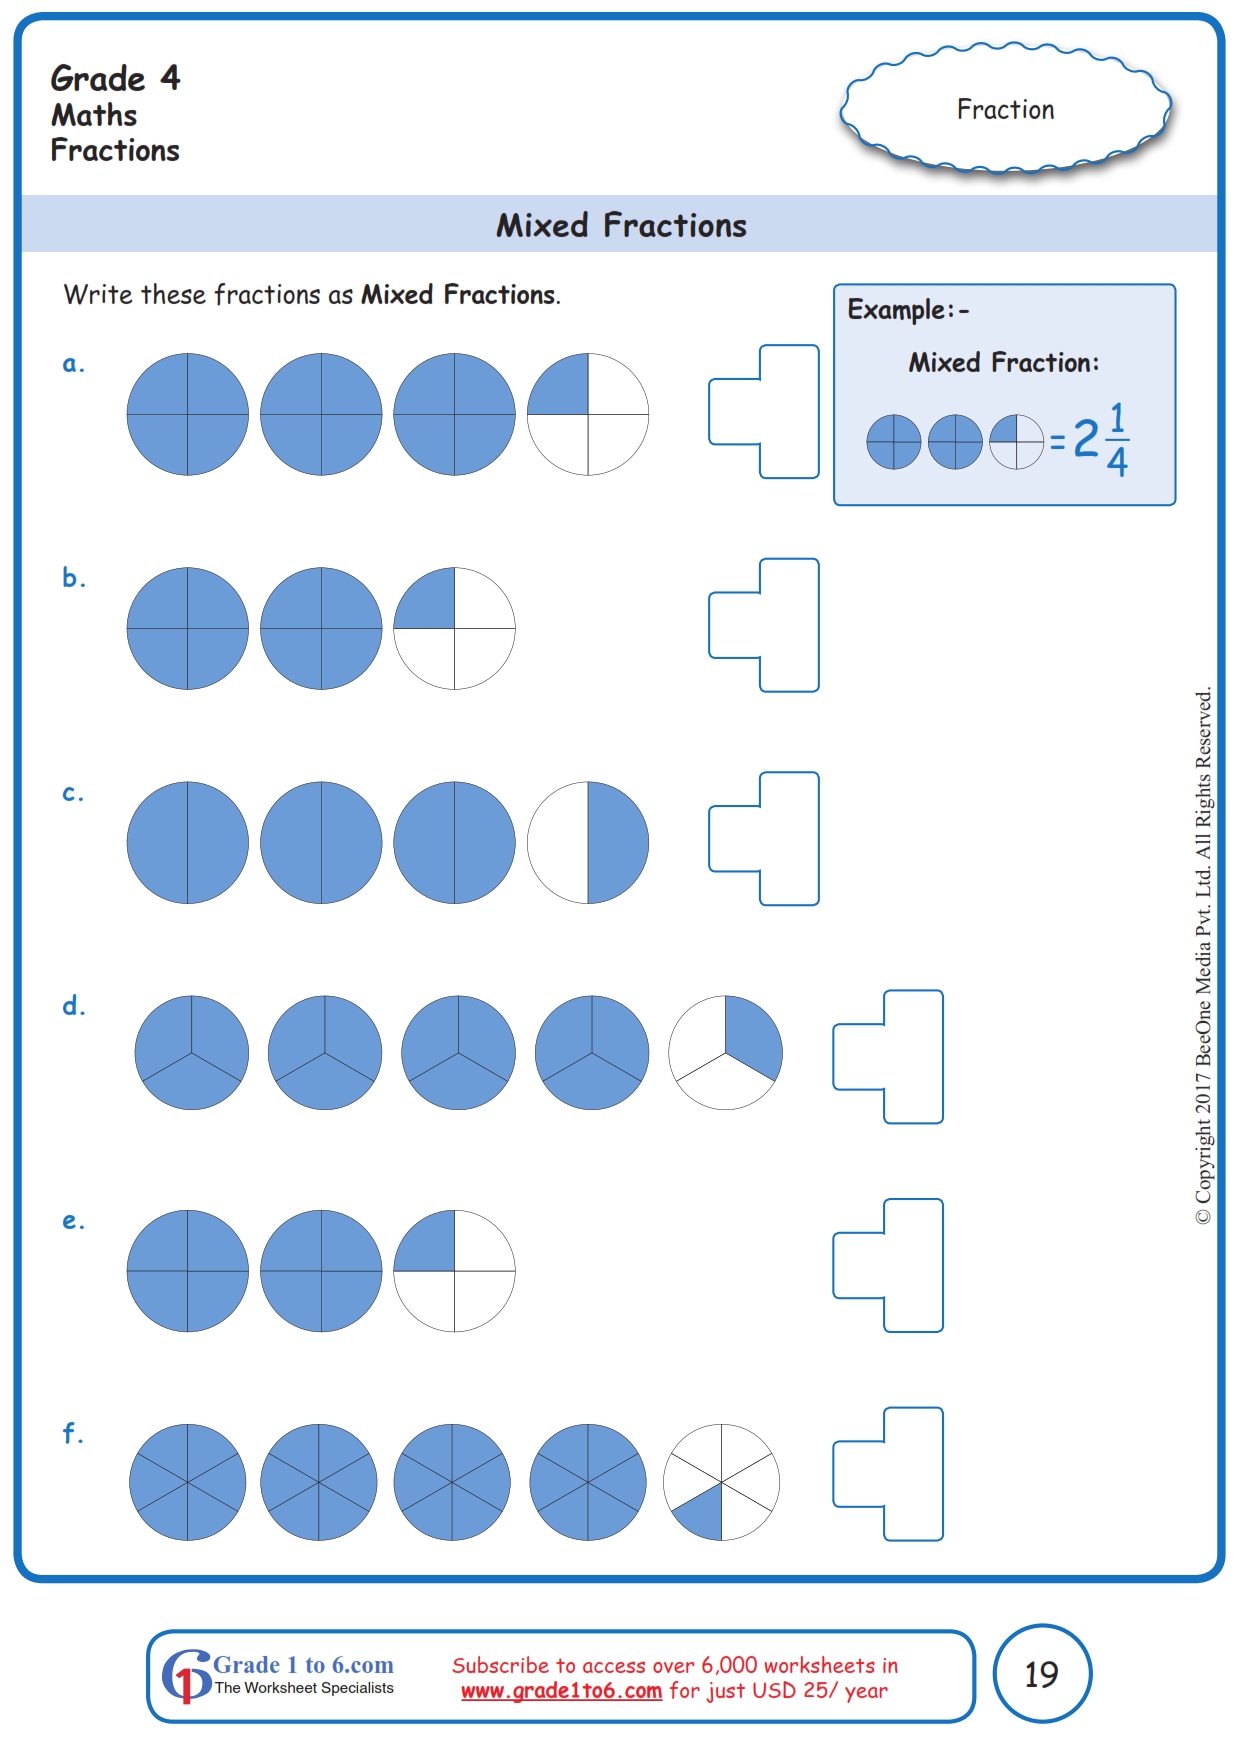 grade-4-mixed-fractions-worksheets-www-grade1to6